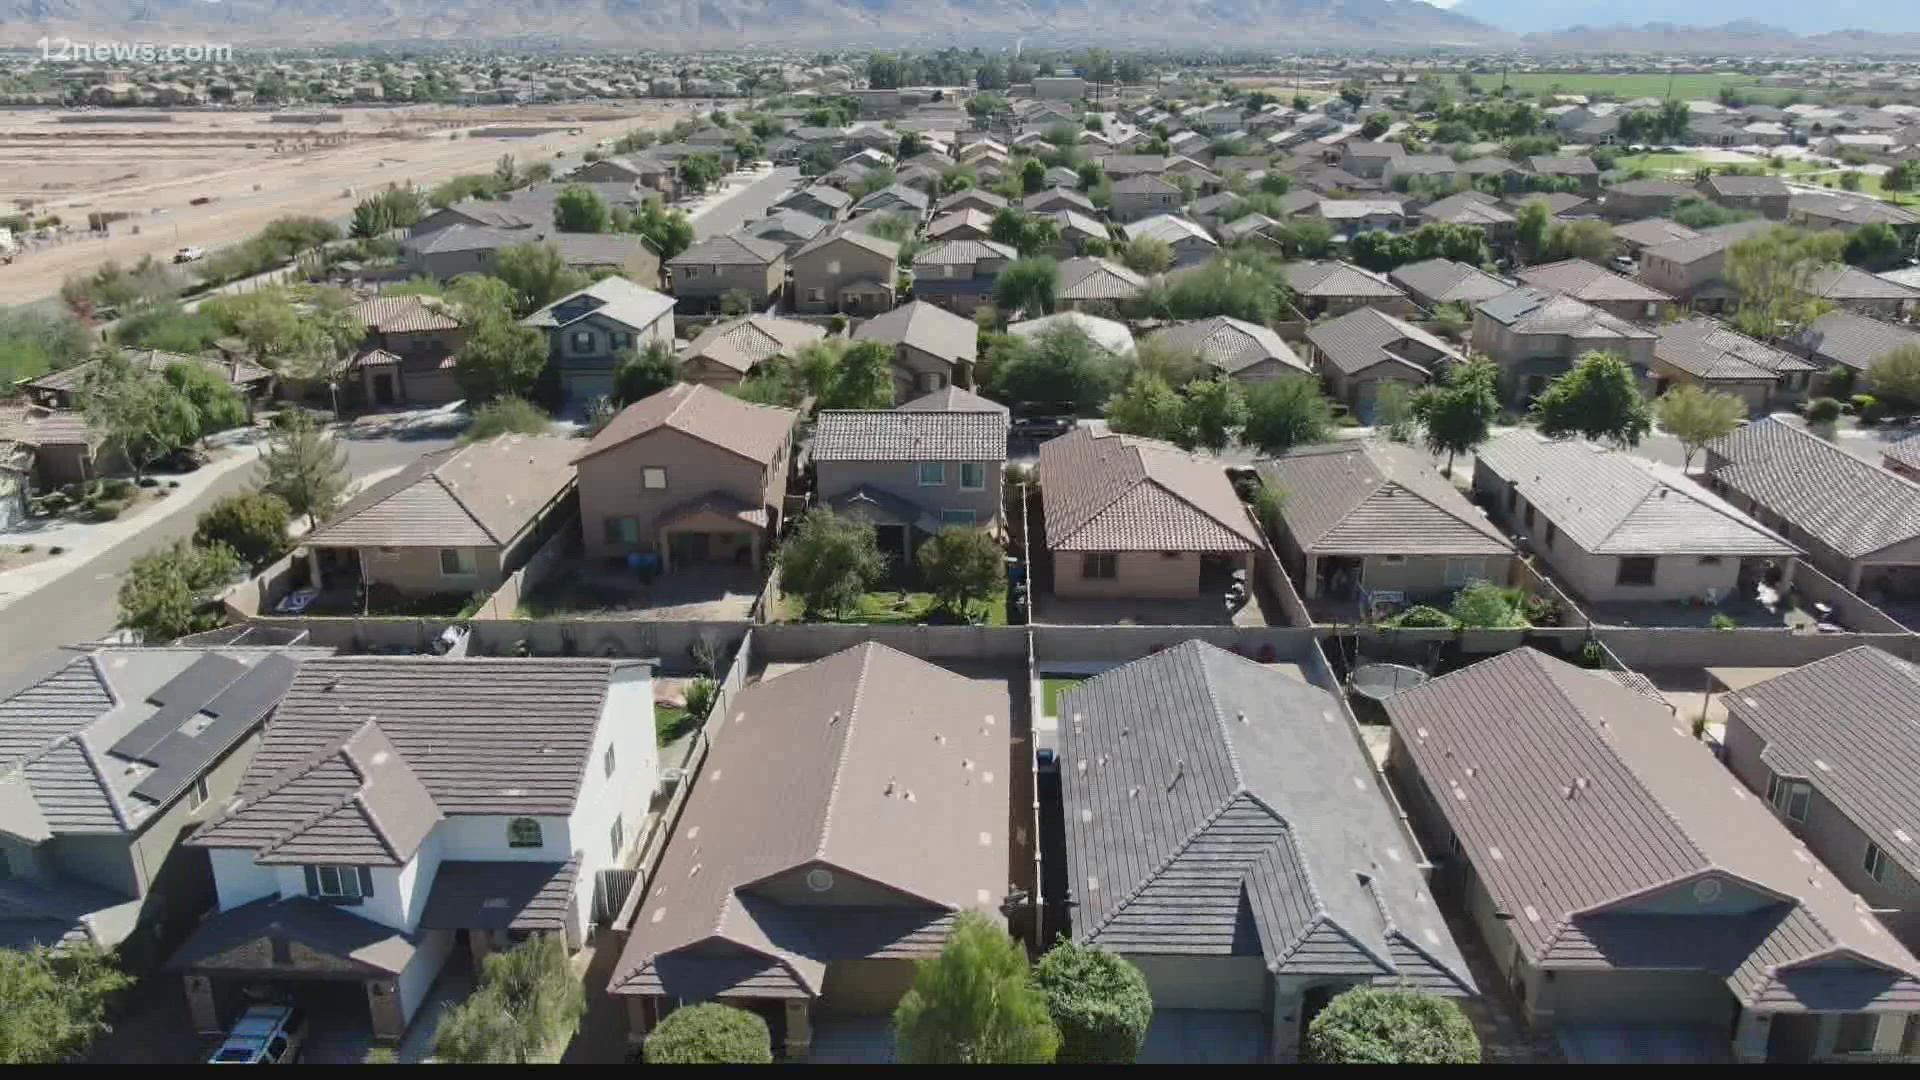 Buying a home in the Valley has become increasingly difficult. A number of companies are helping to make things more competitive for first-time home buyers.